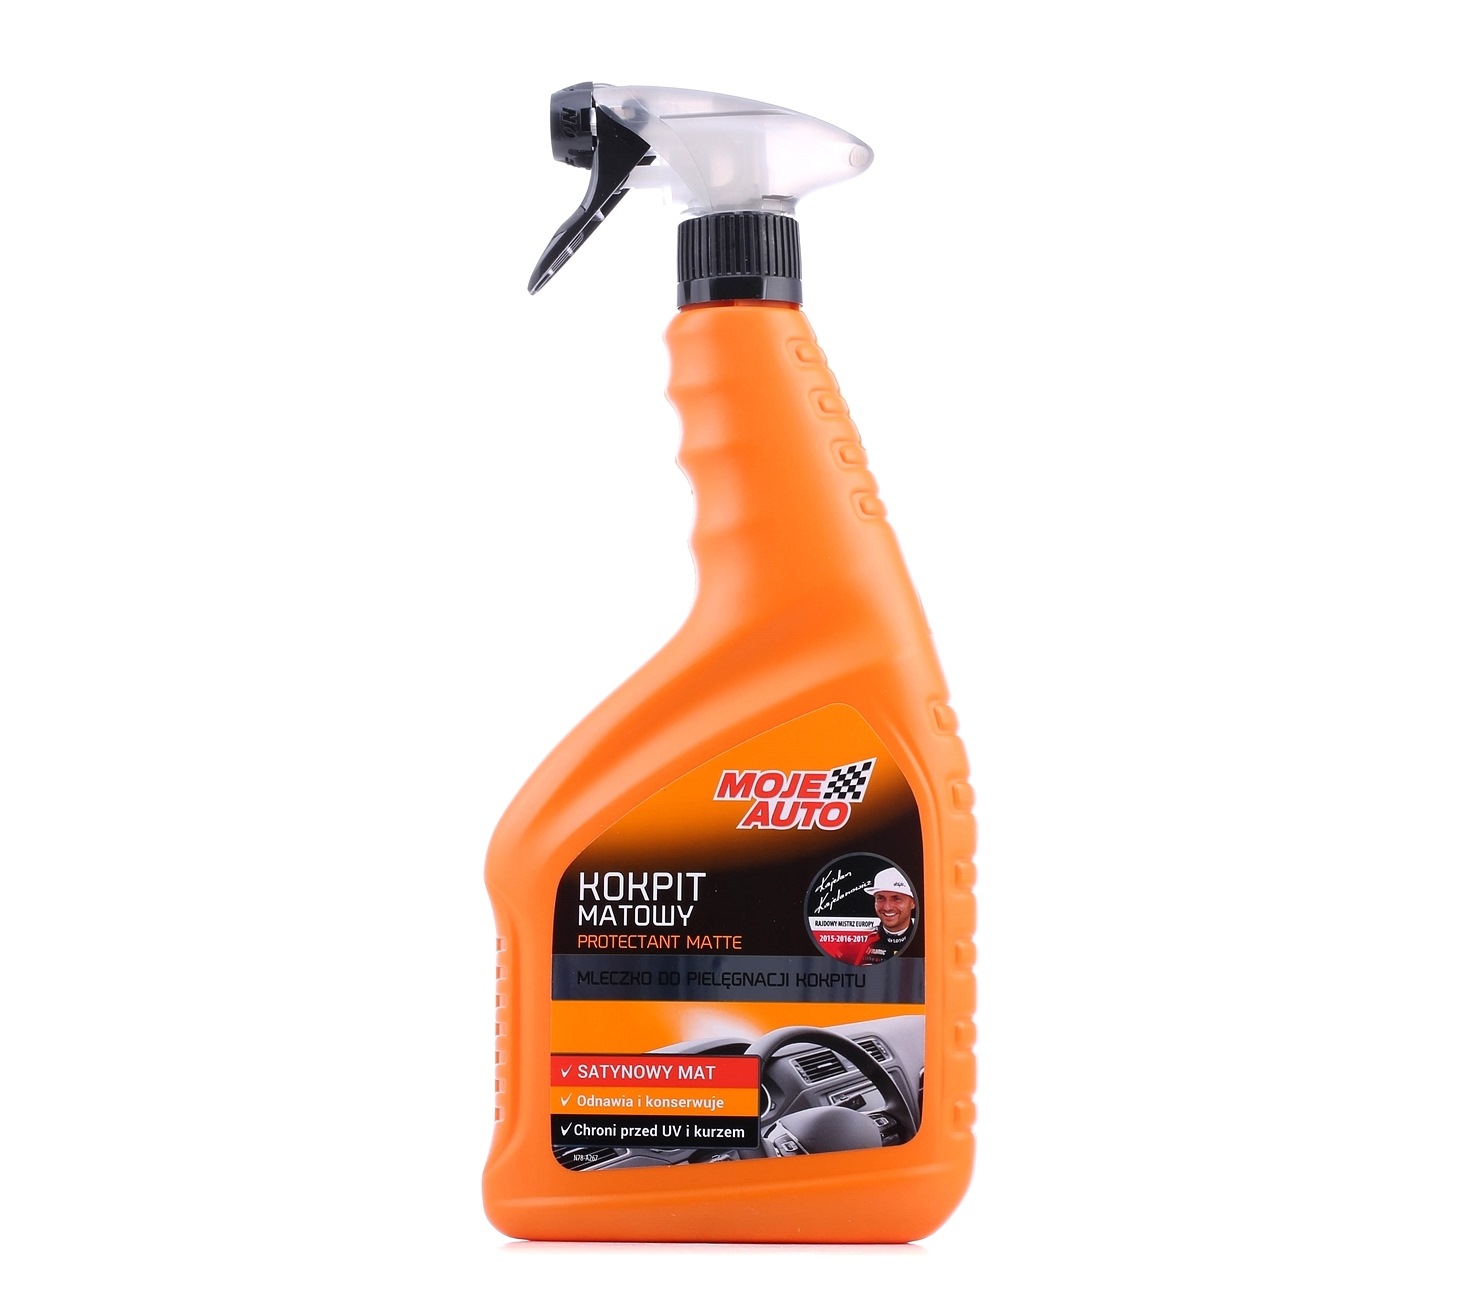 MOJE AUTO 19002 Synthetic Material Care Products Mat, Capacity: 650ml, aerosol